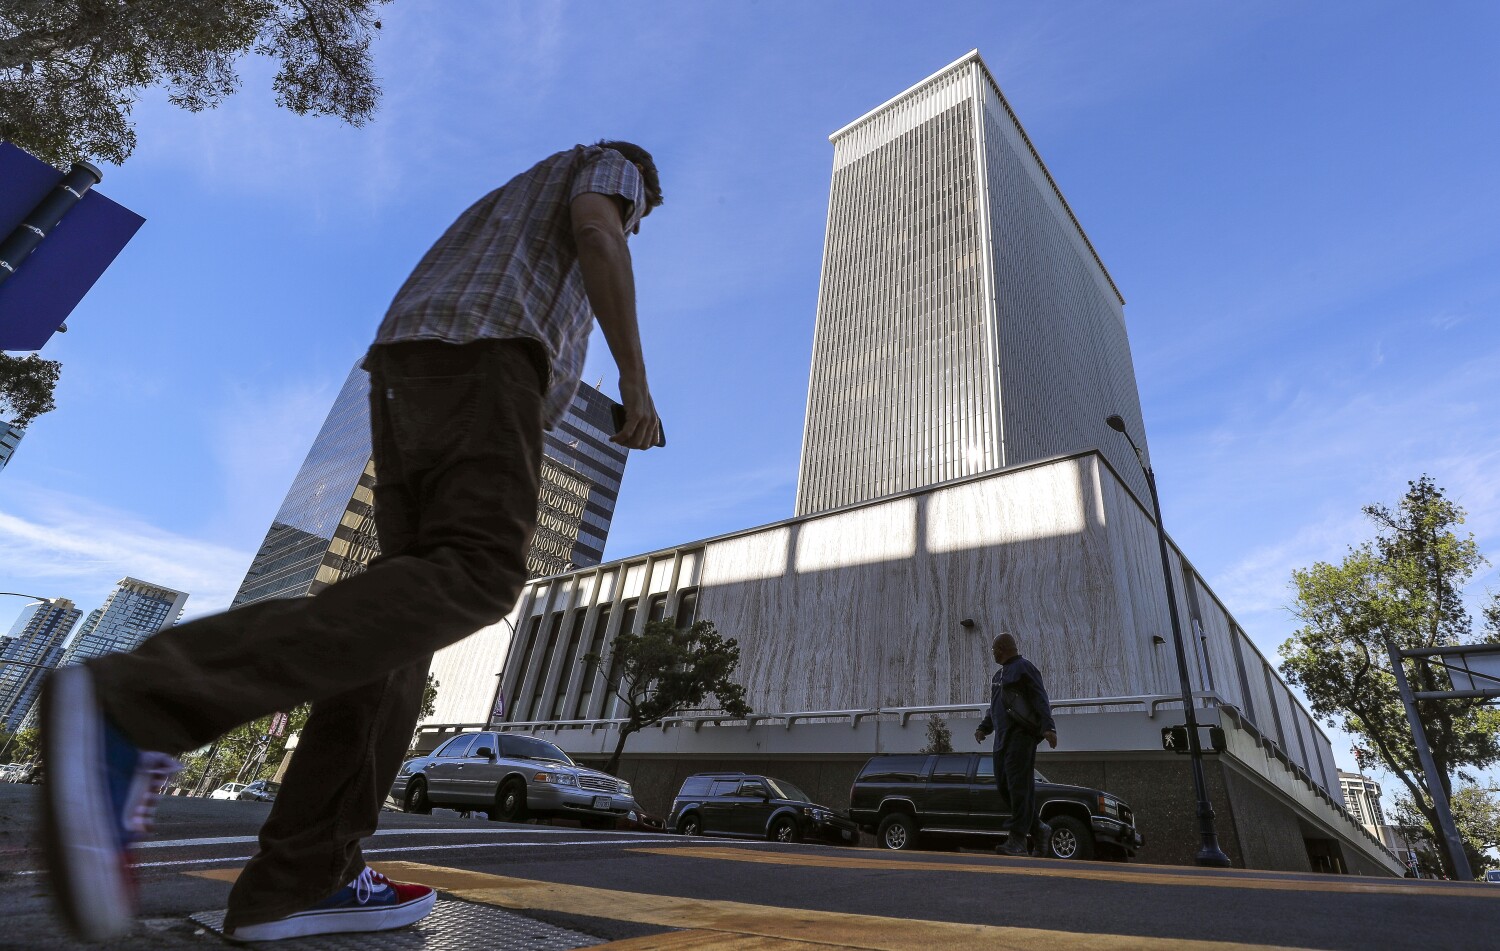 Cost of office space for San Diego city workers varies widely based on litigation, study finds